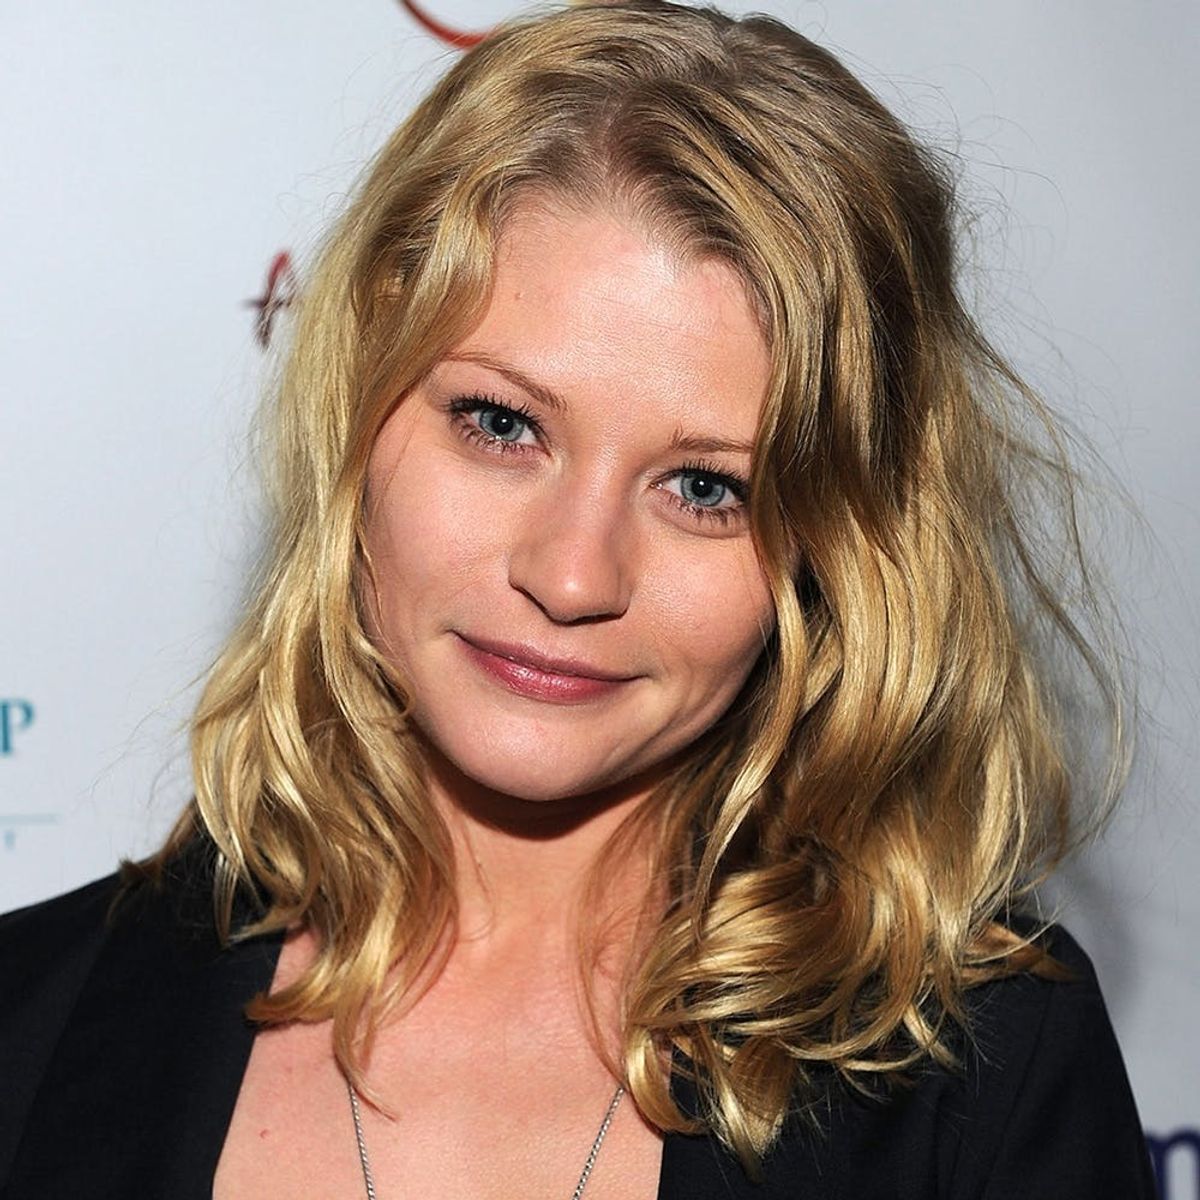 Emilie de Ravin’s Baby Name Is Straight Out of a Fairytale